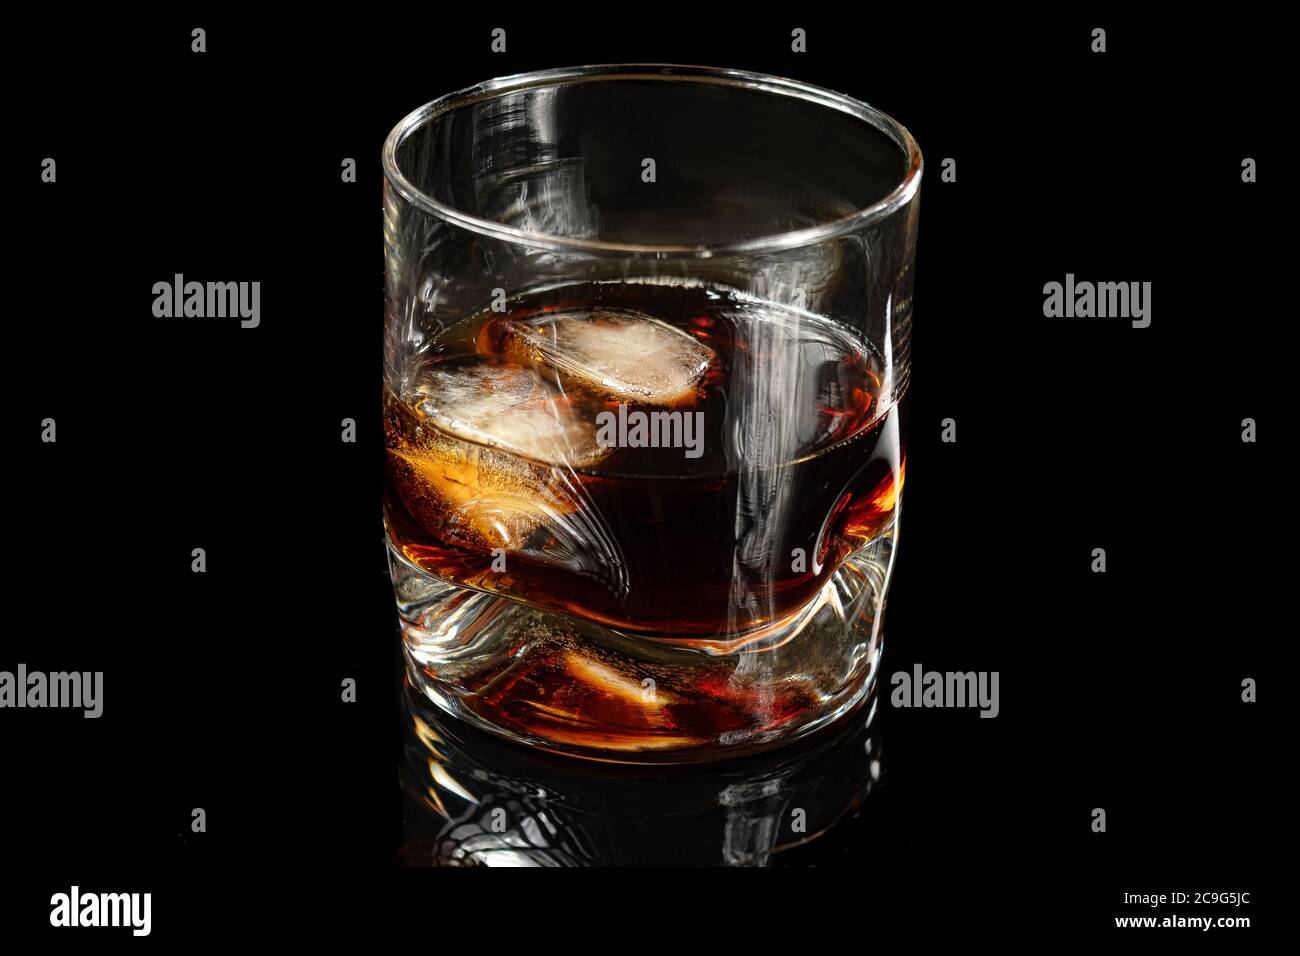 glass with whiskey and two ice cubes photographed in black background Stock Photo